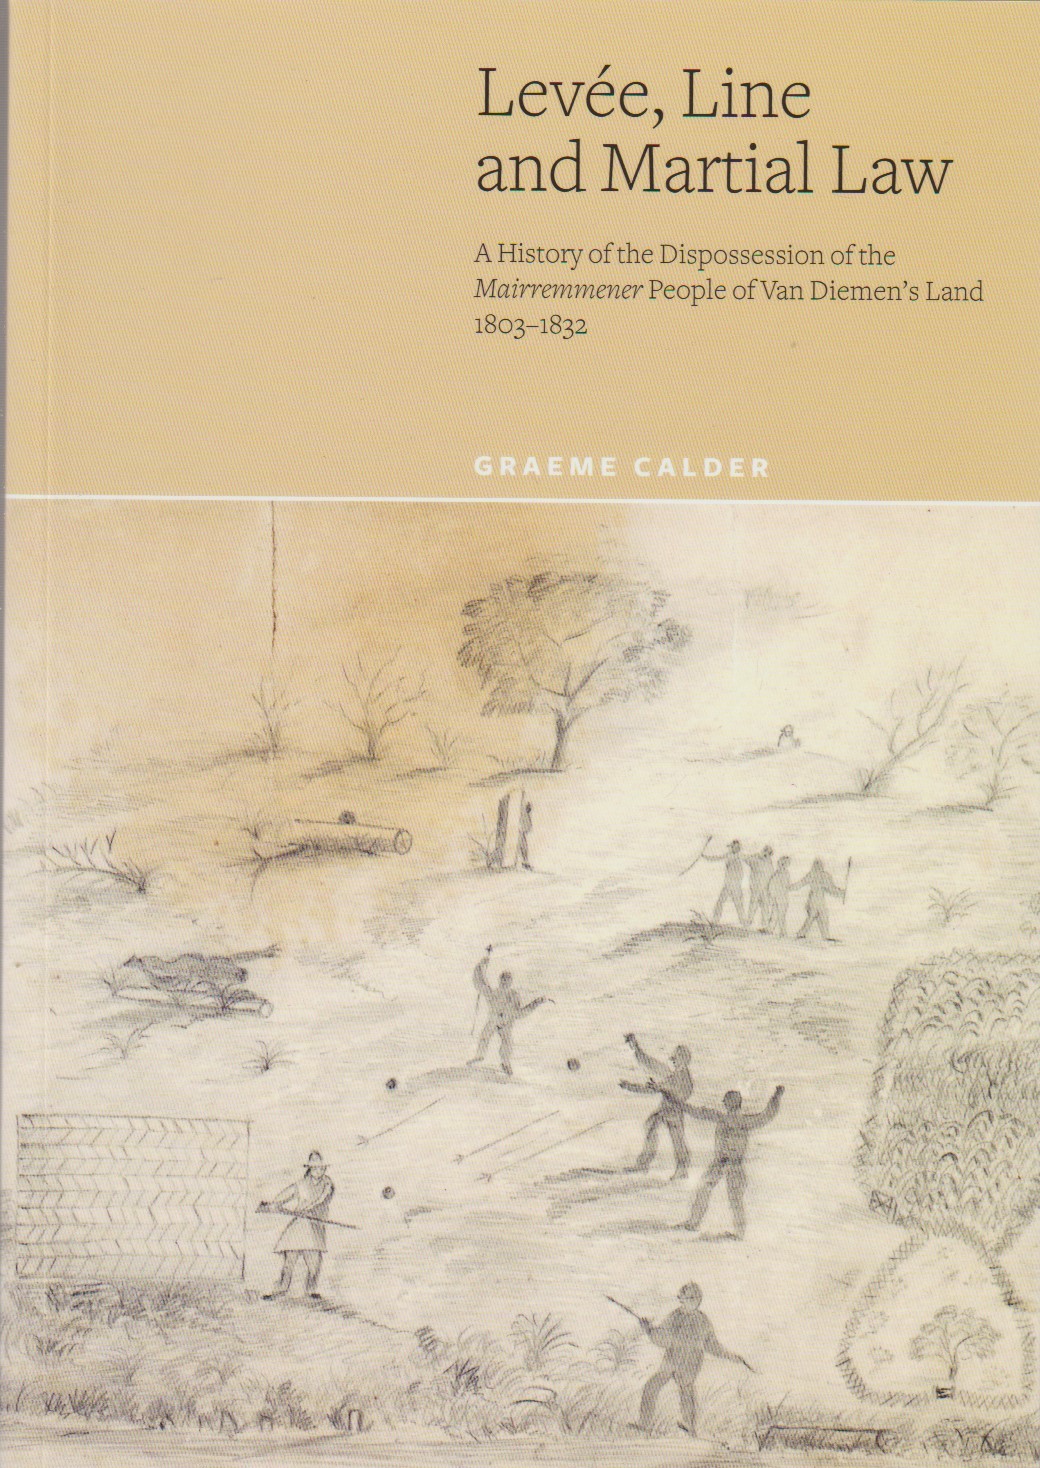 Levee, Line and Martial Law - a history of the dispossession of the Mairremmener people of Van Diemen's Land 1803-1832